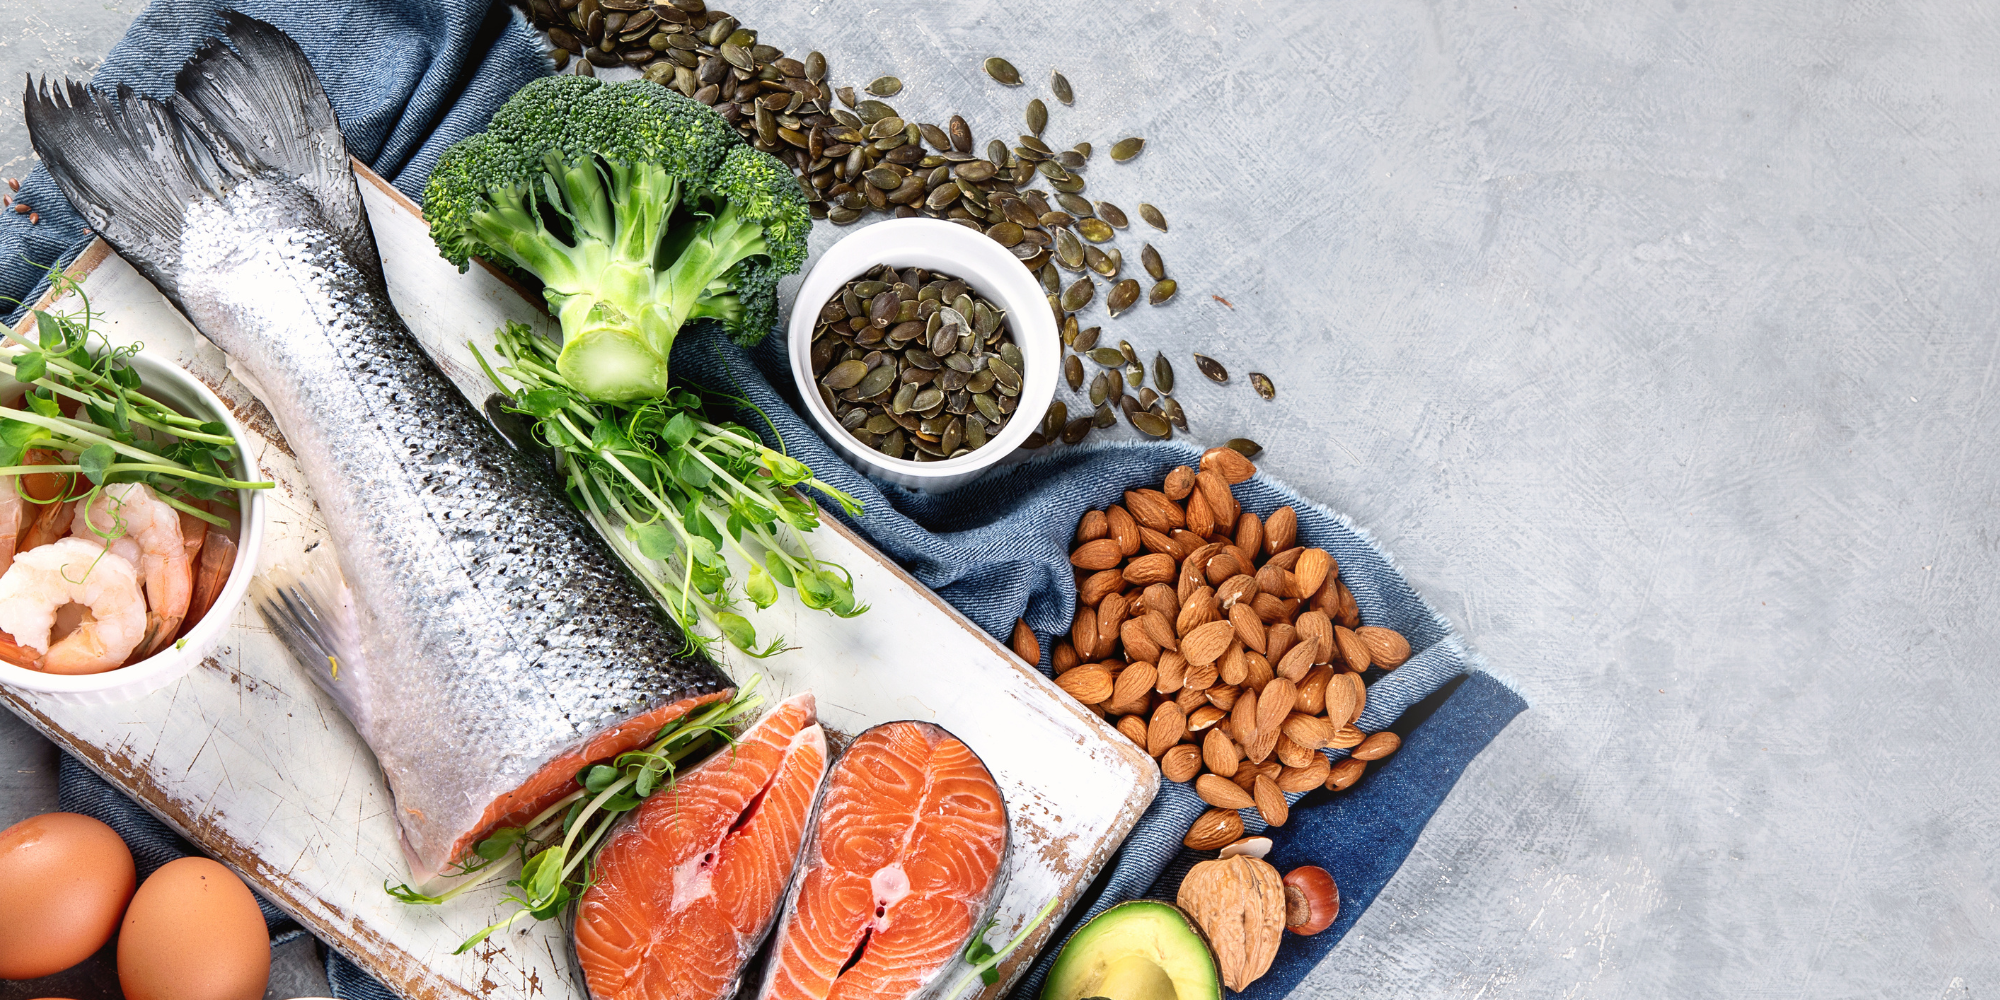 An assortment of omega-3 rich foods on a counter arranged to the left of the image. Laid out is the tail section of salmon along with two salmon steaks, a head of broccoli, almonds, avocado, and pumpkin seeds